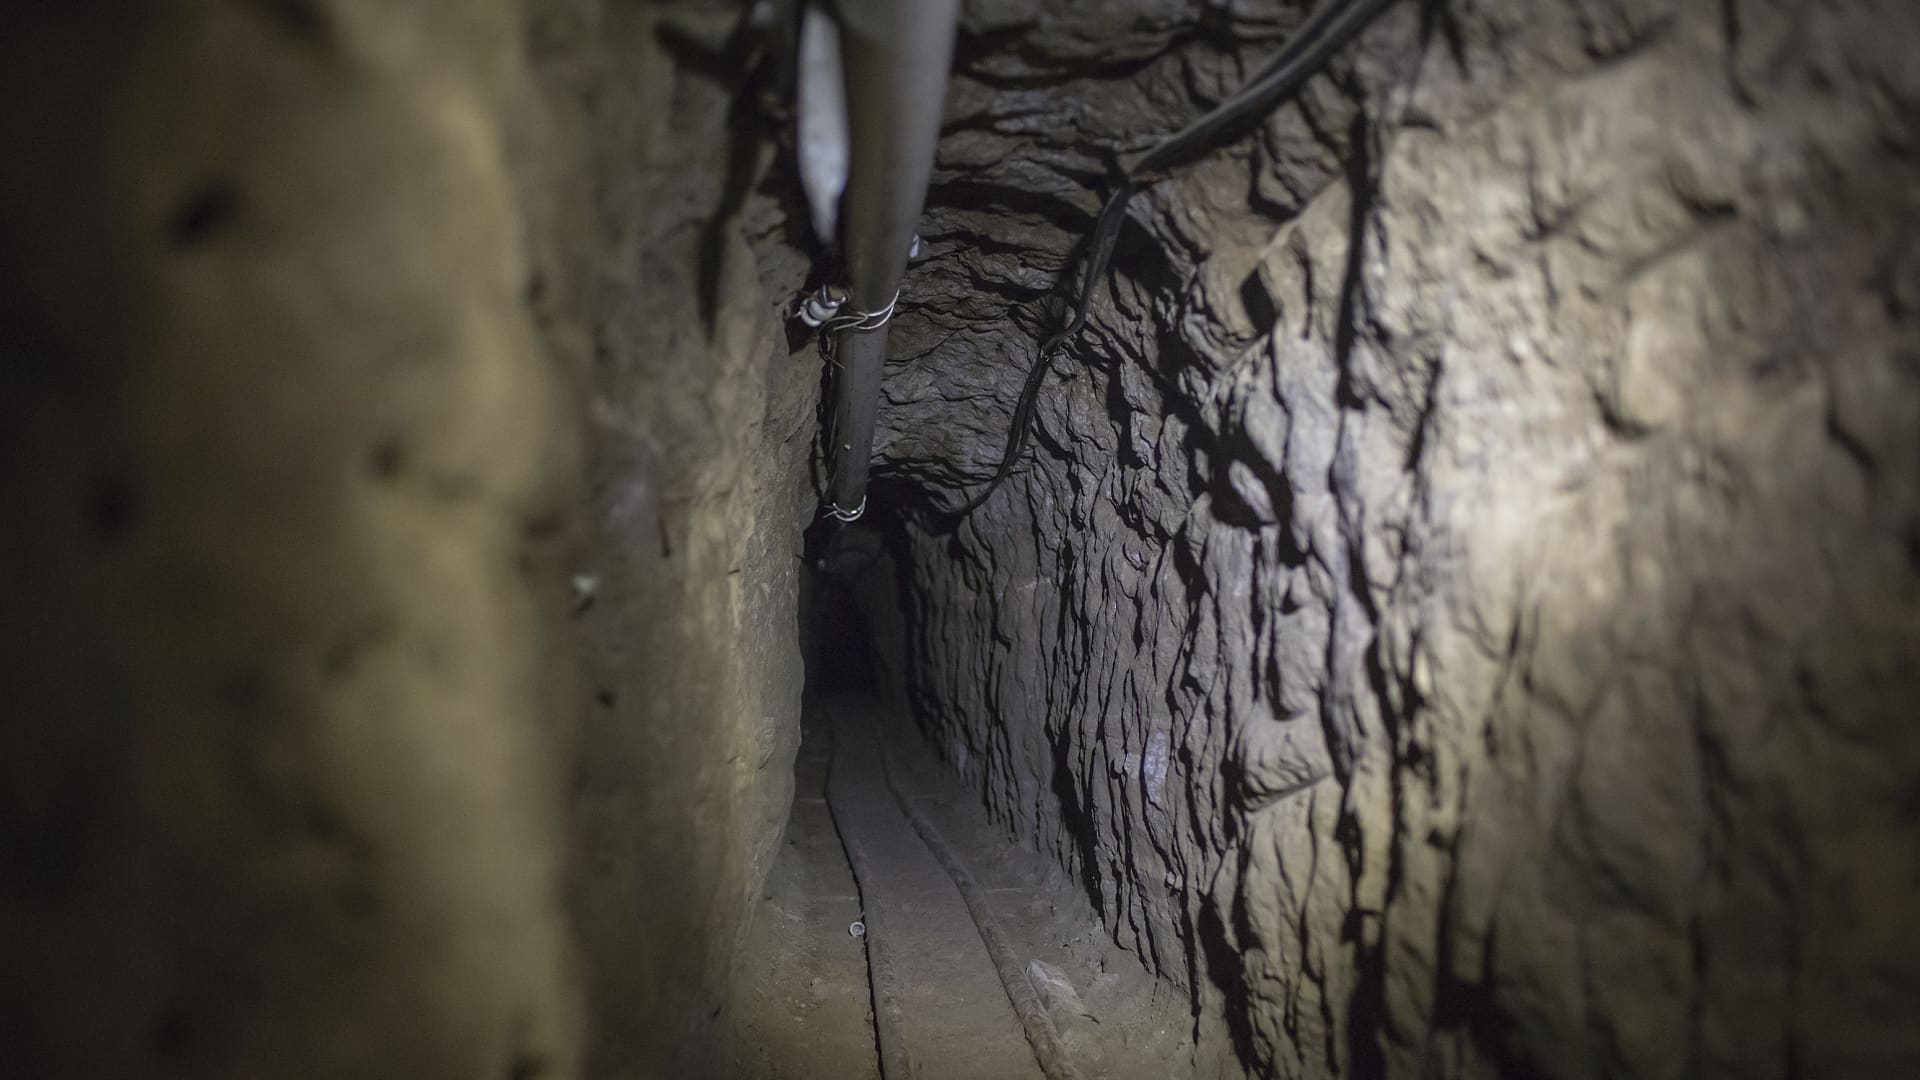 A view of the tunnel through which according to the authorities Joaquin 'El Chapo' Guzman escaped from Mexican Maximum Security Prison of 'El Altiplano' on July 15, 2015 in Mexico City, Mexico.